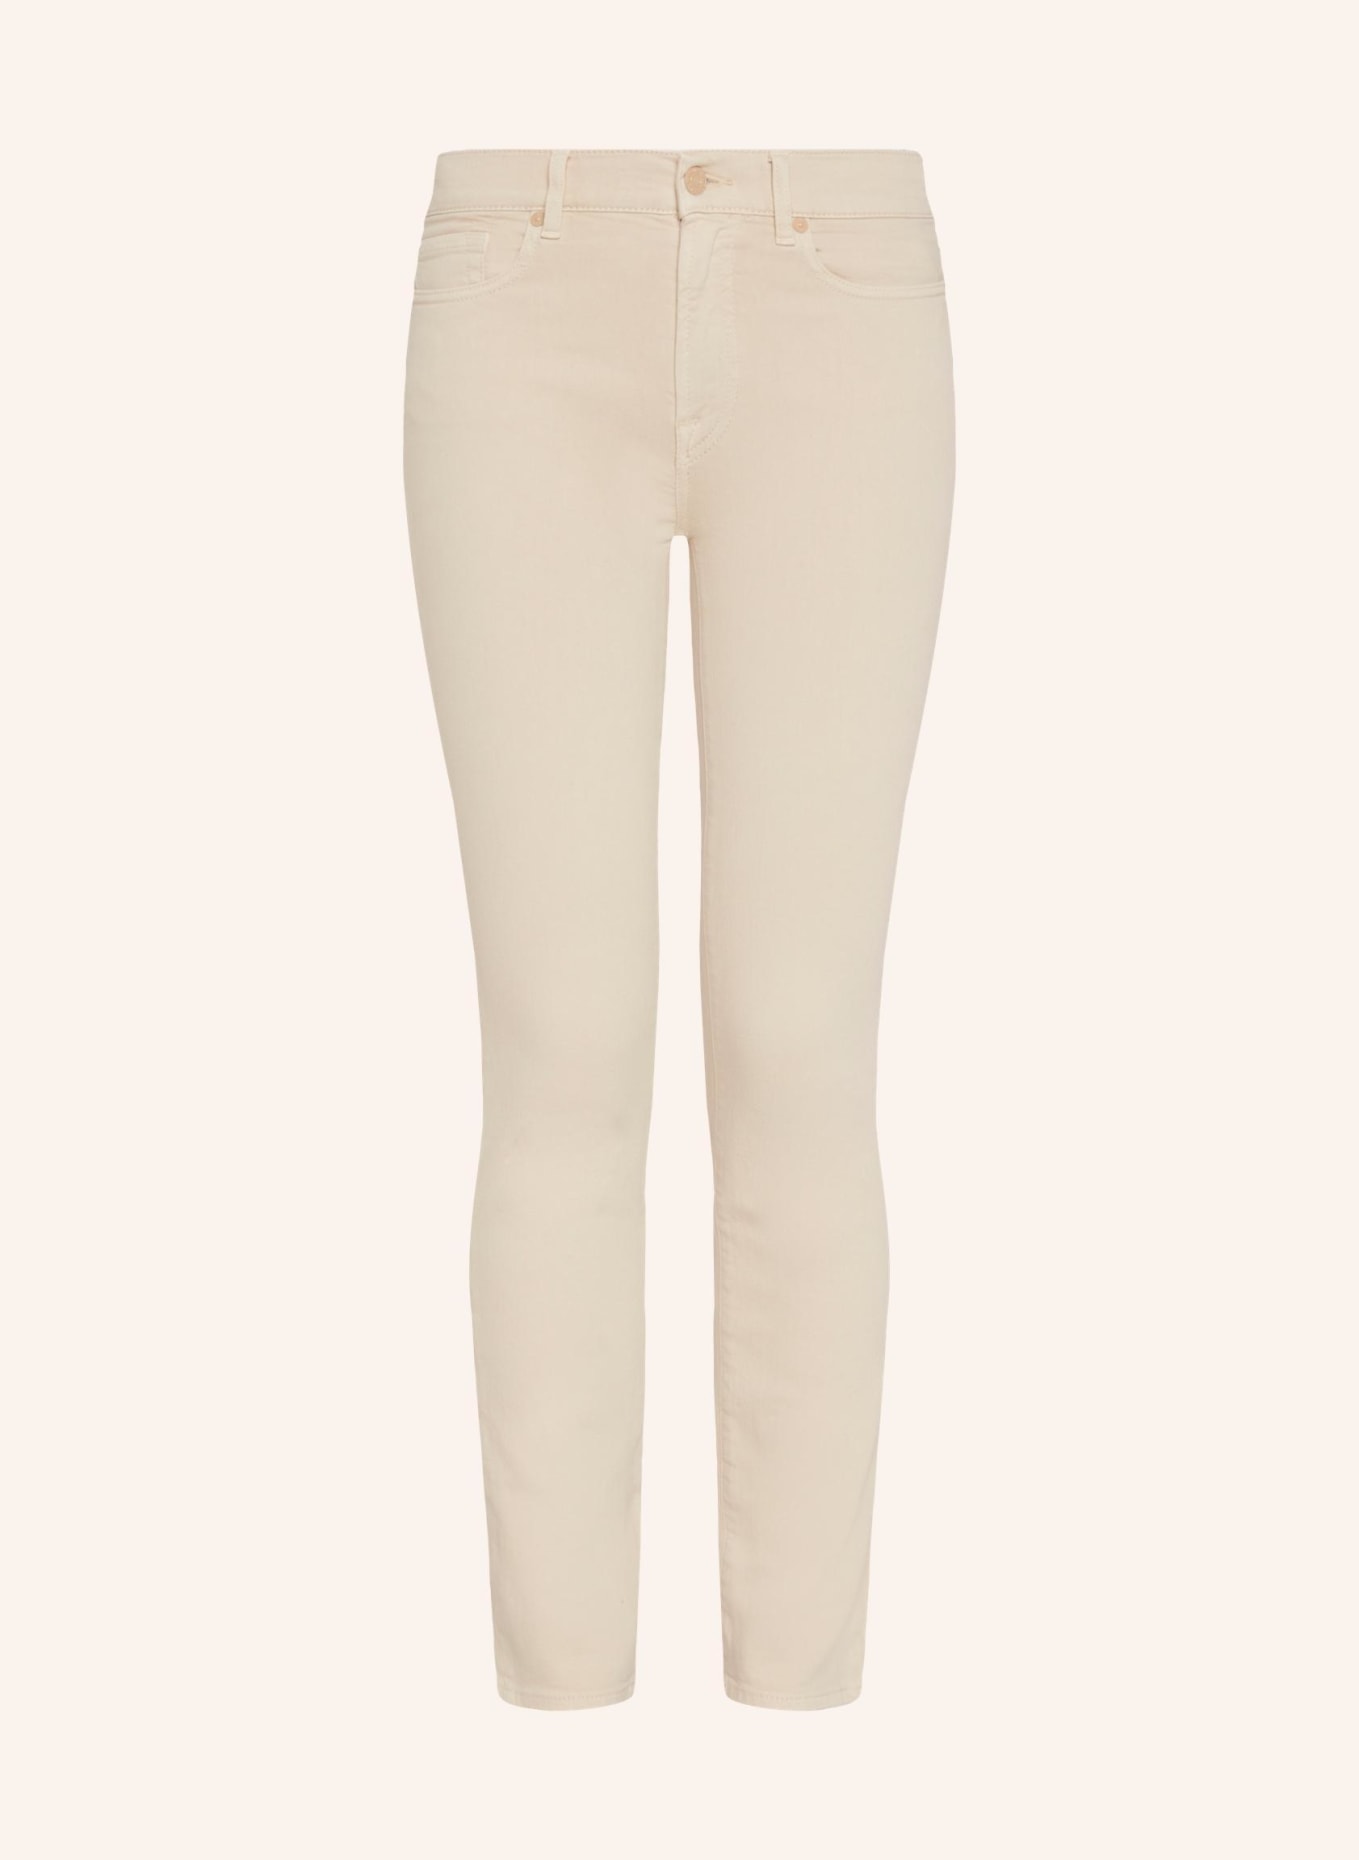 7 for all mankind Pants ROXANNE Slim Fit, Farbe: WEISS (Bild 1)